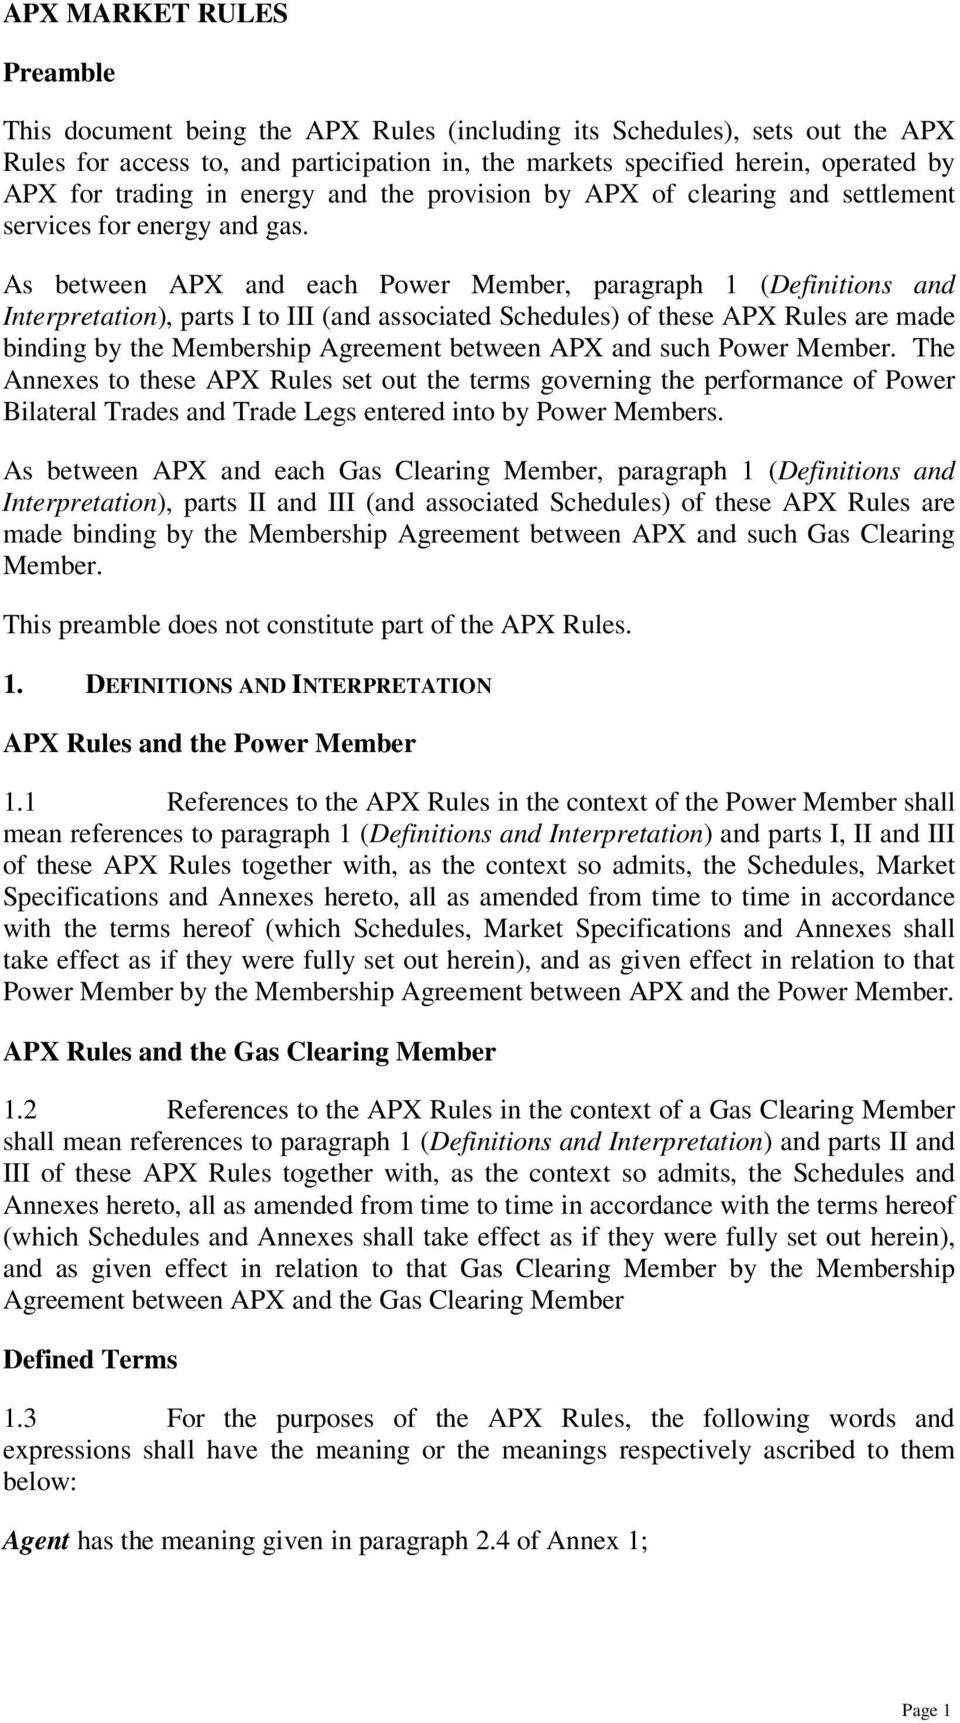 As between APX and each Power Member, paragraph 1 (Definitions and Interpretation), parts I to III (and associated Schedules) of these APX Rules are made binding by the Membership Agreement between